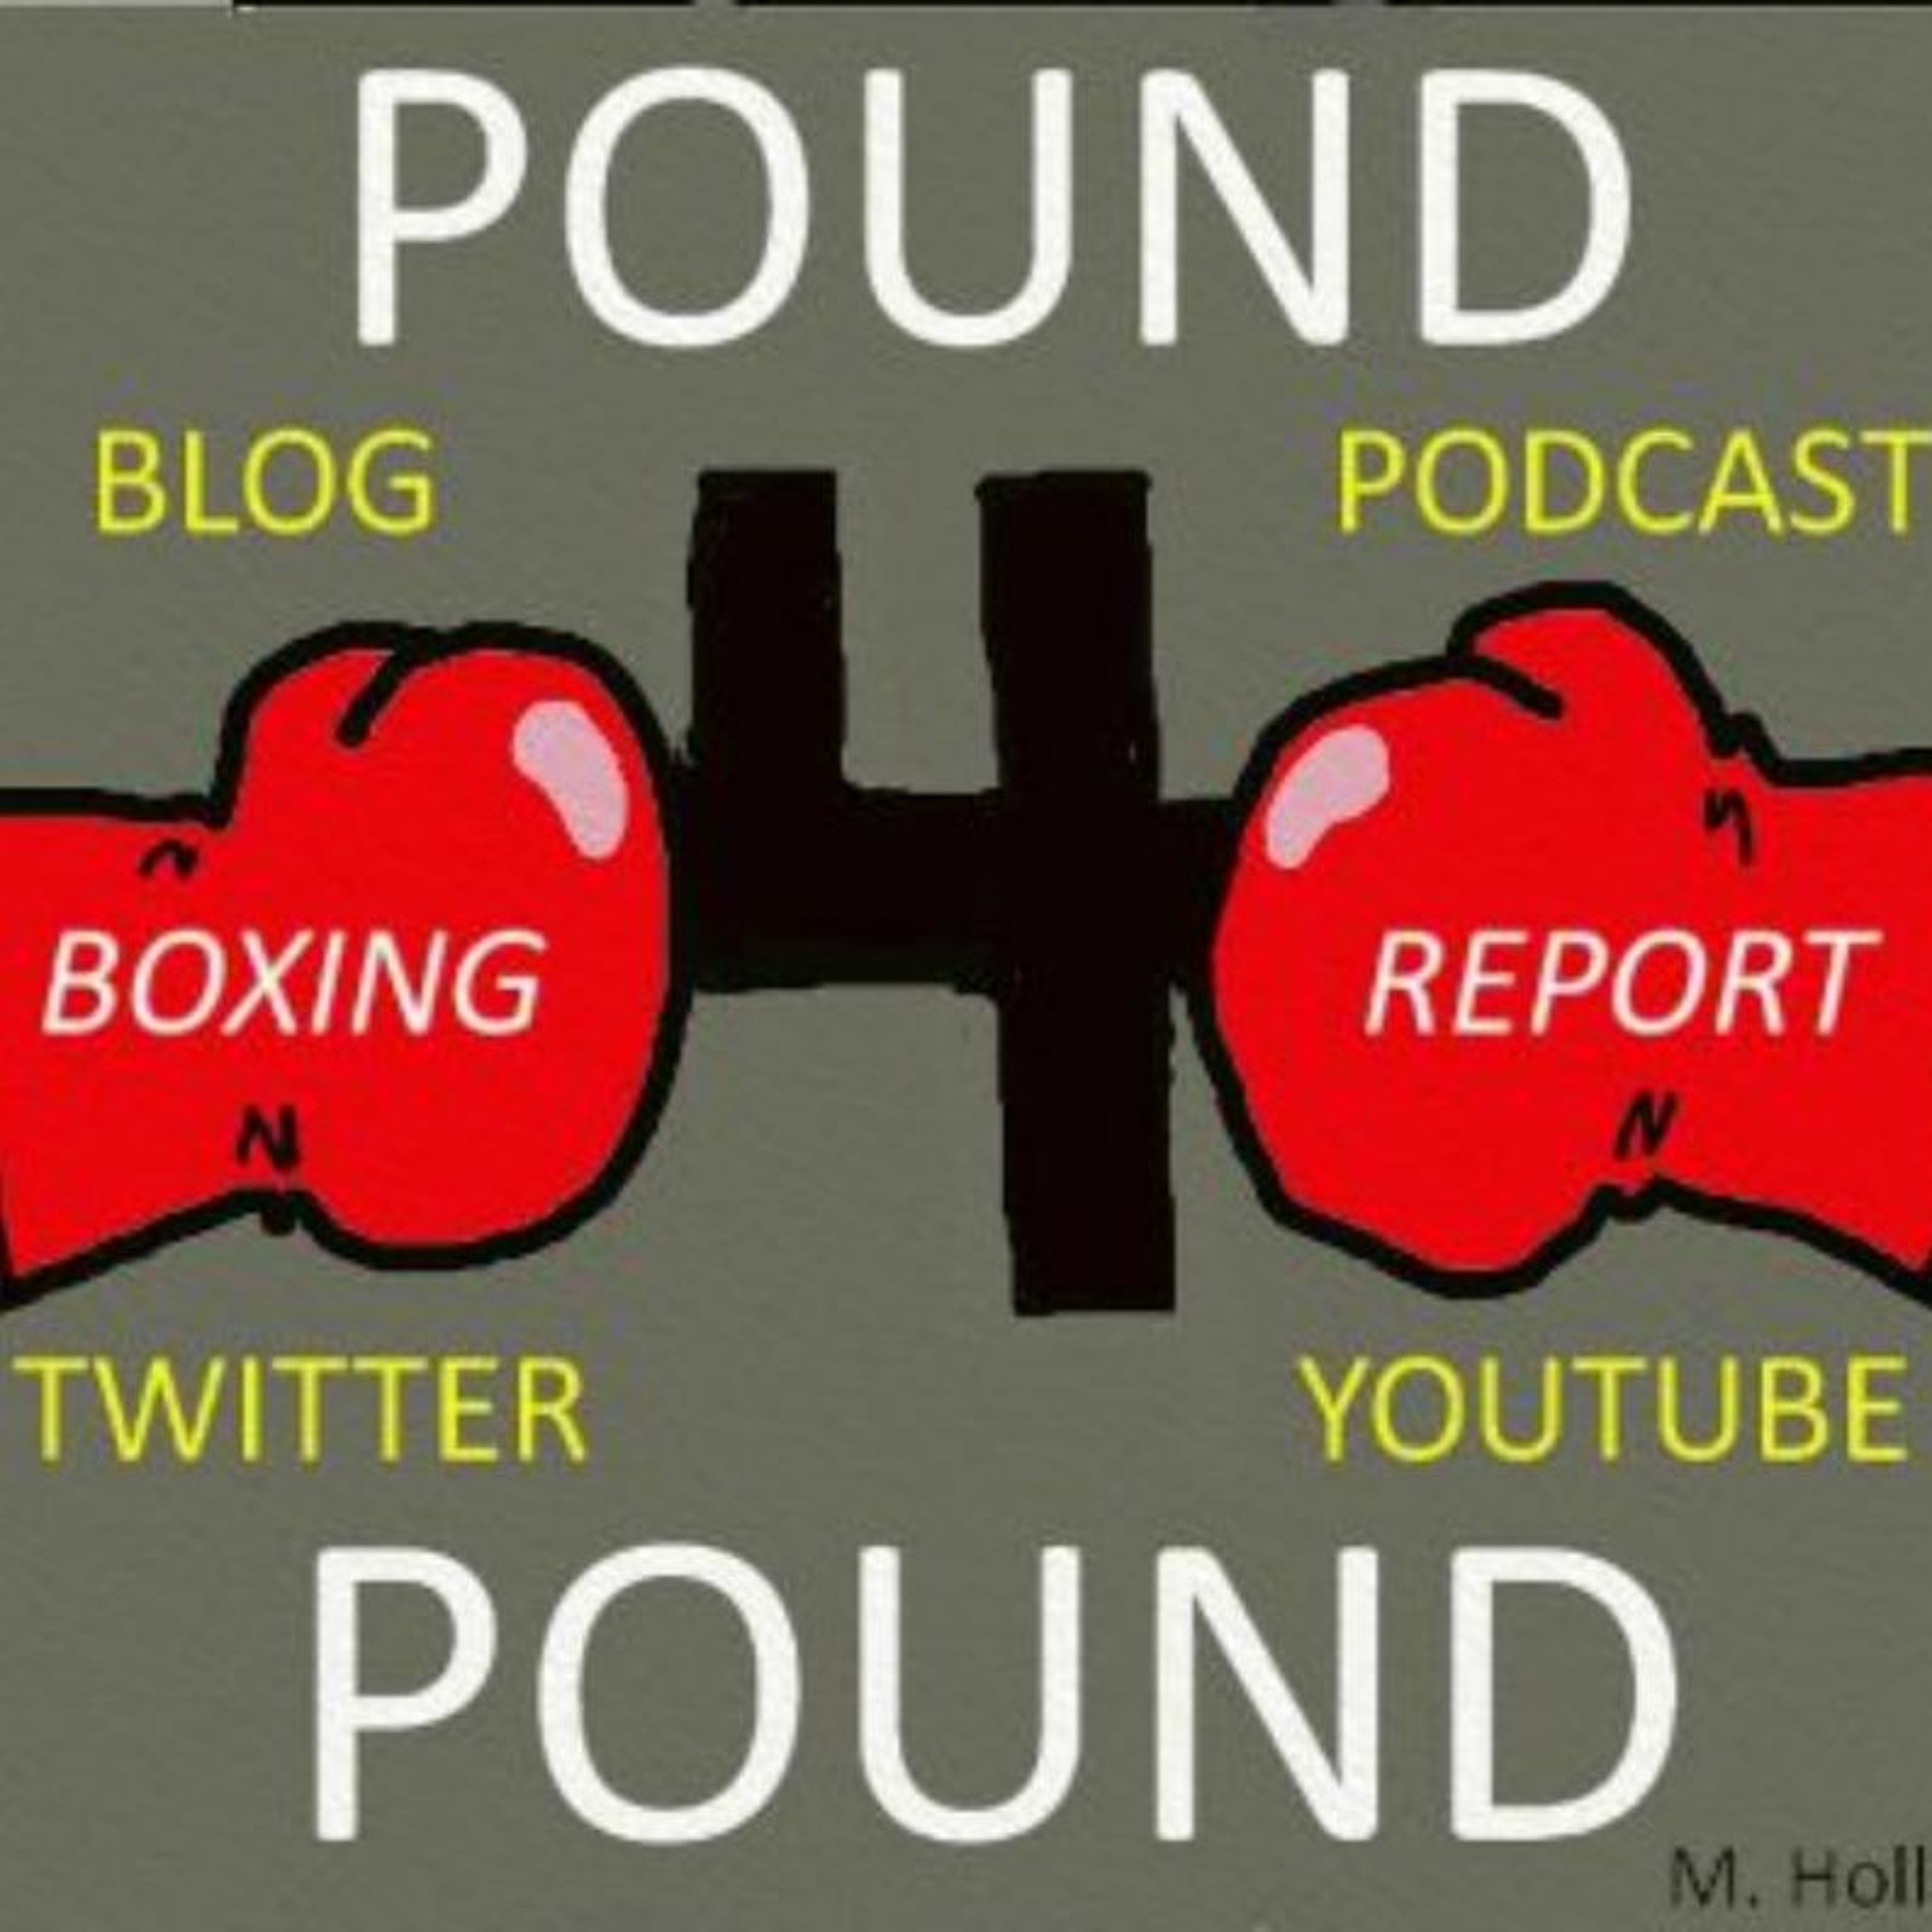 Pound 4 Pound Boxing Report #259 - Rest In Power ”Sweet Pea”